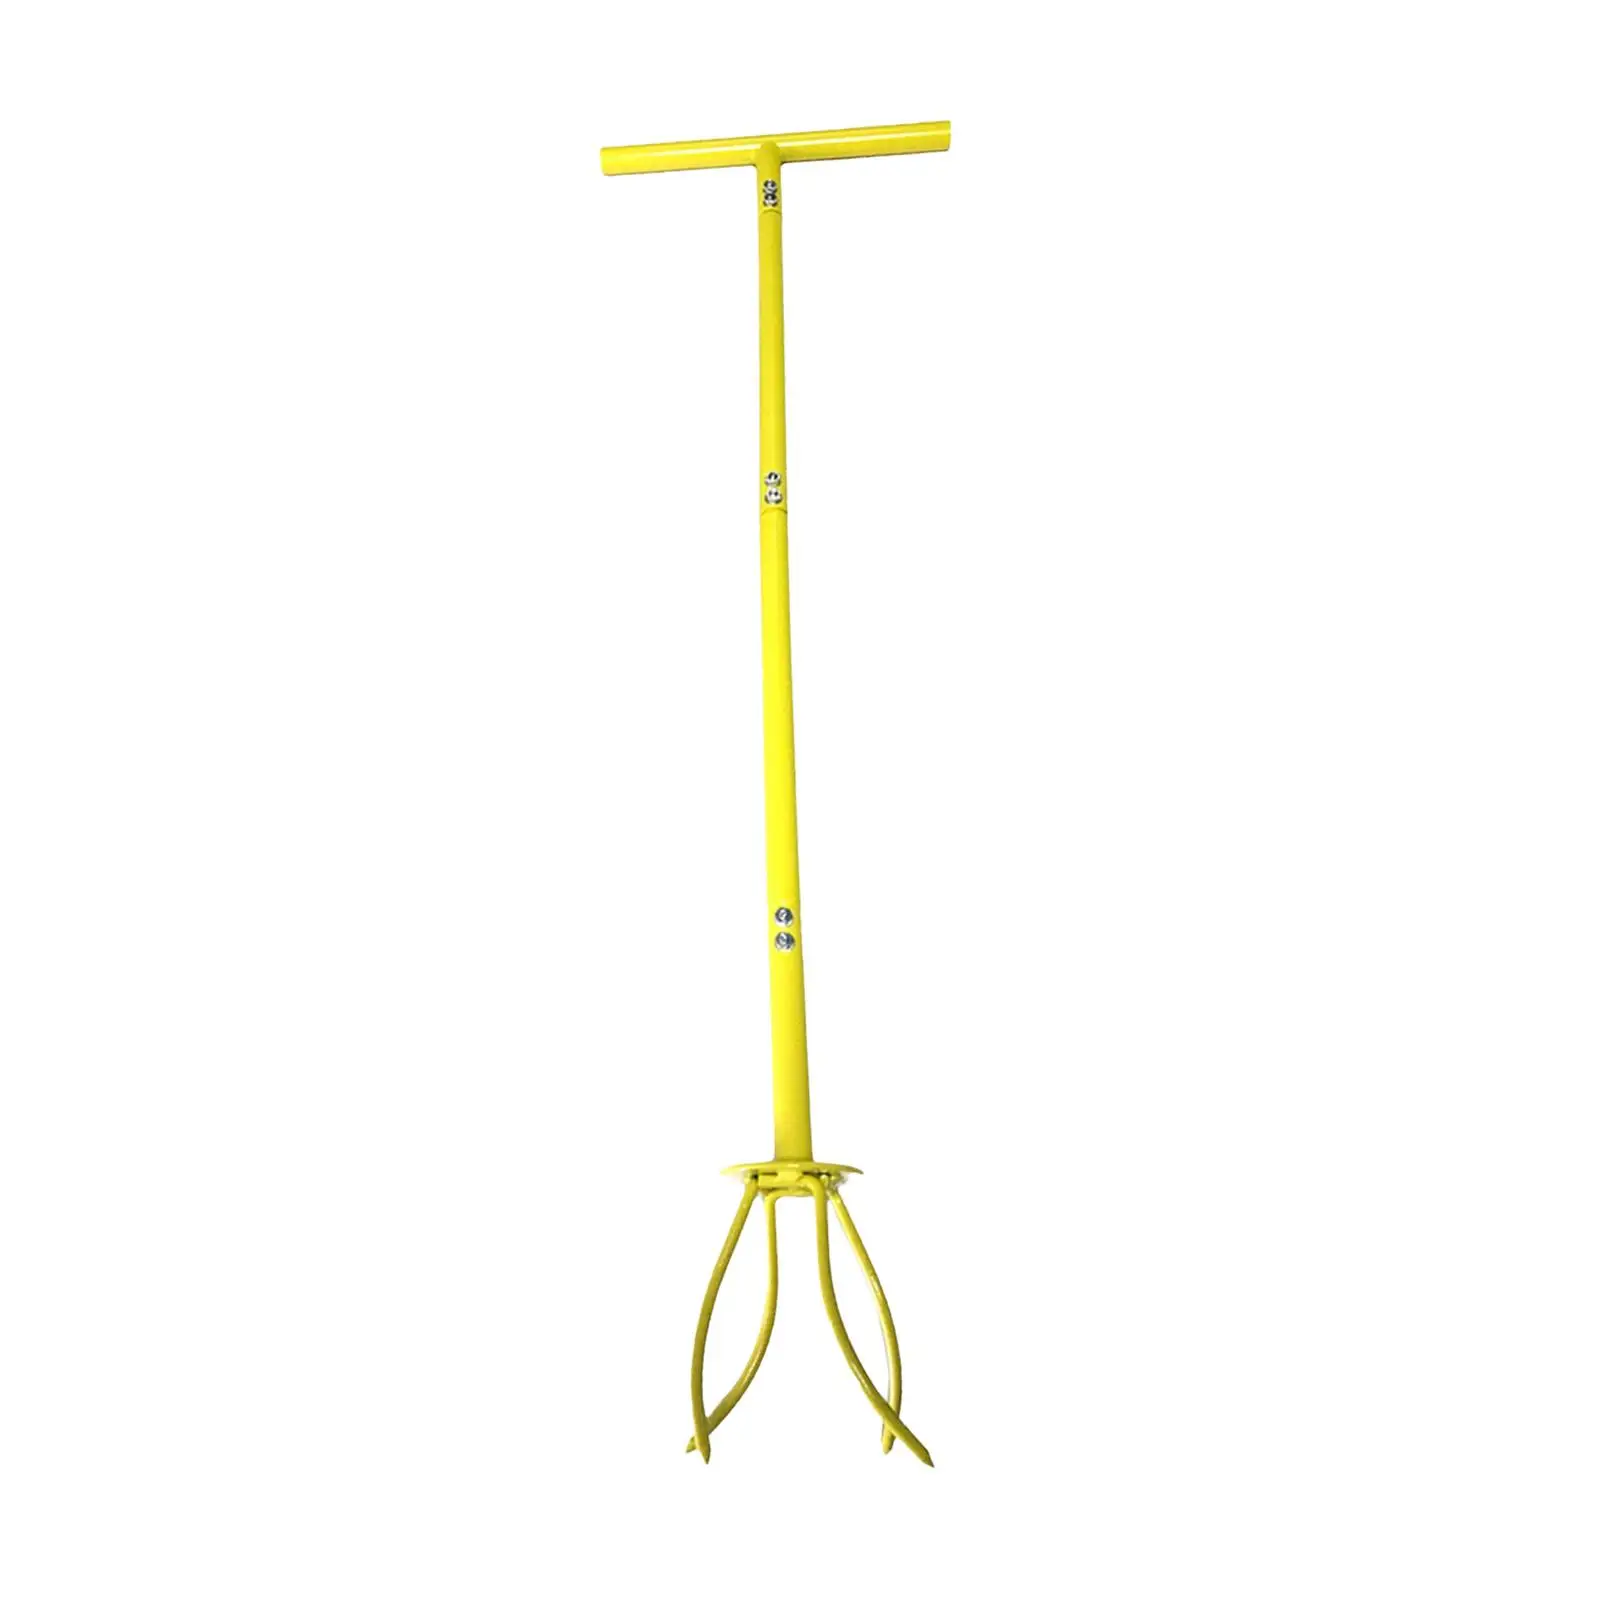 Gardening for Cultivate, Loosen, Aerate Durable Gardening Claw Cultivator